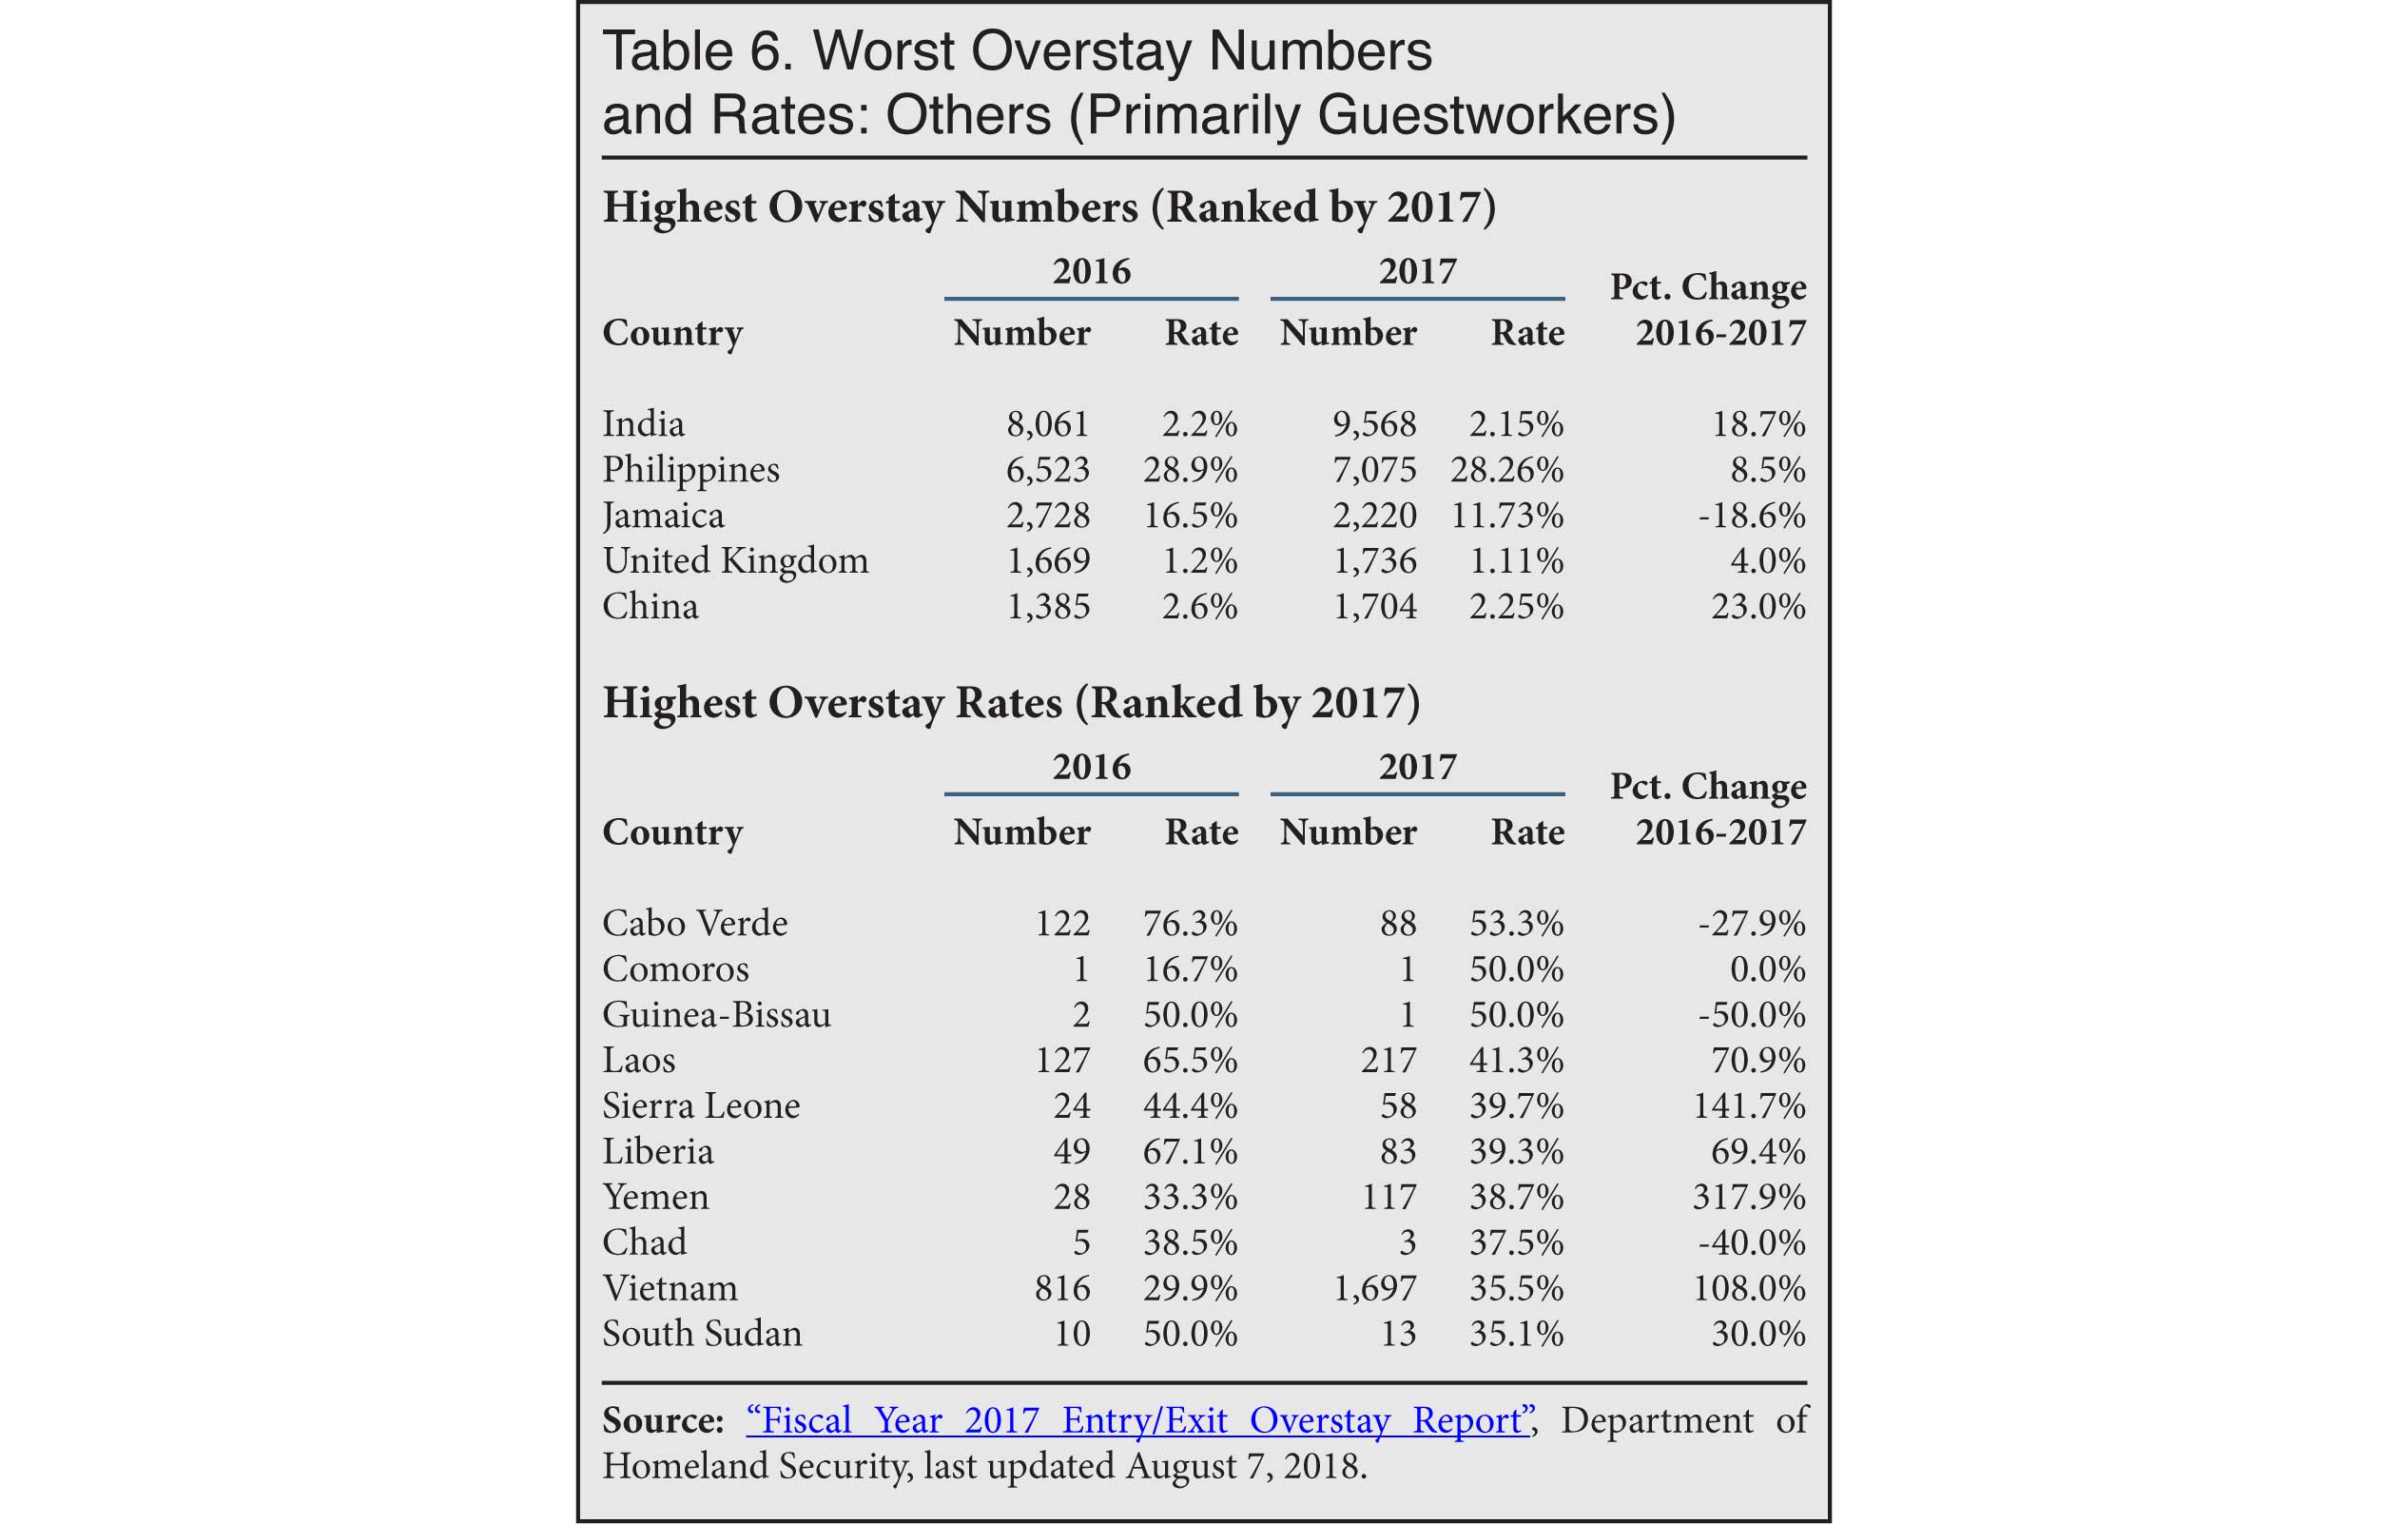 Table: Worst Overstay Numbers and Rates by Country in Other Visa Categories, 2017